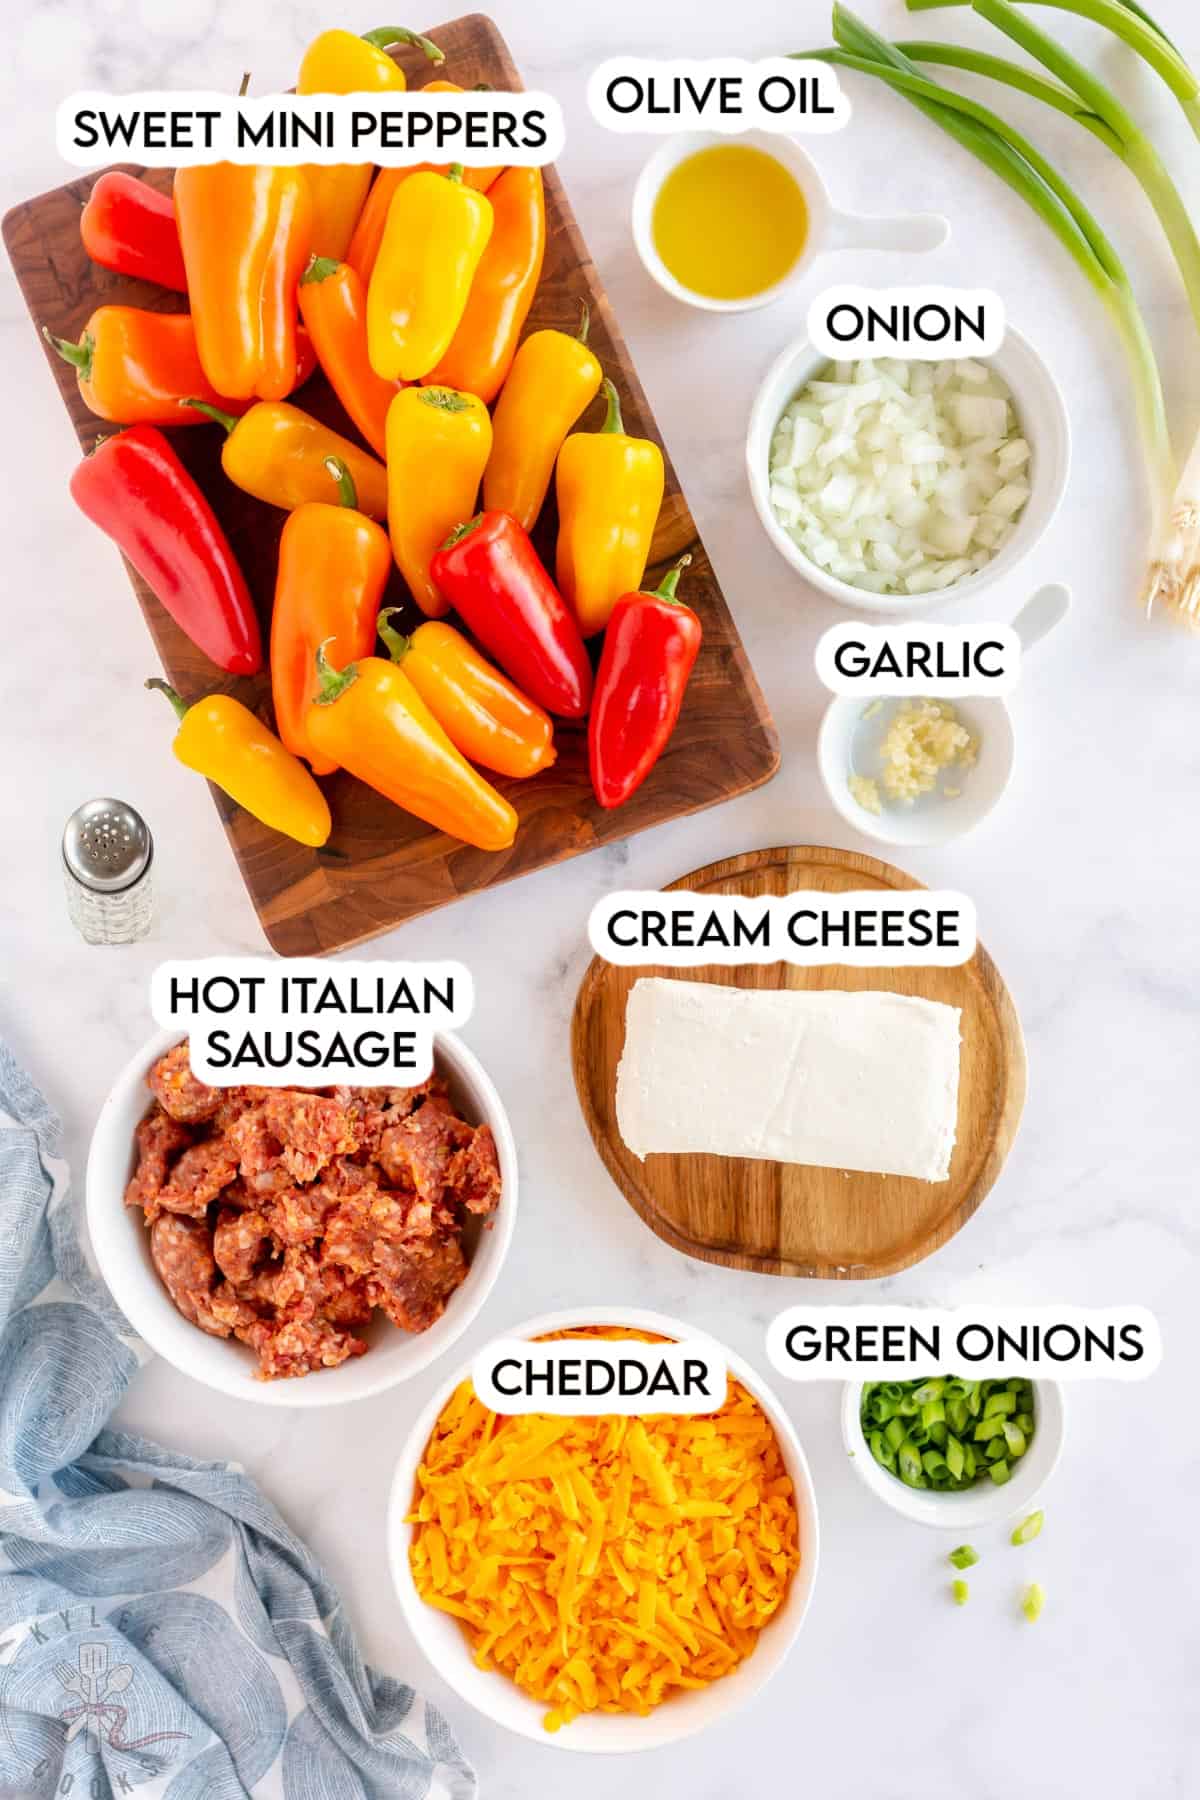 Ingredients to make stuffed mini peppers laid out and labeled